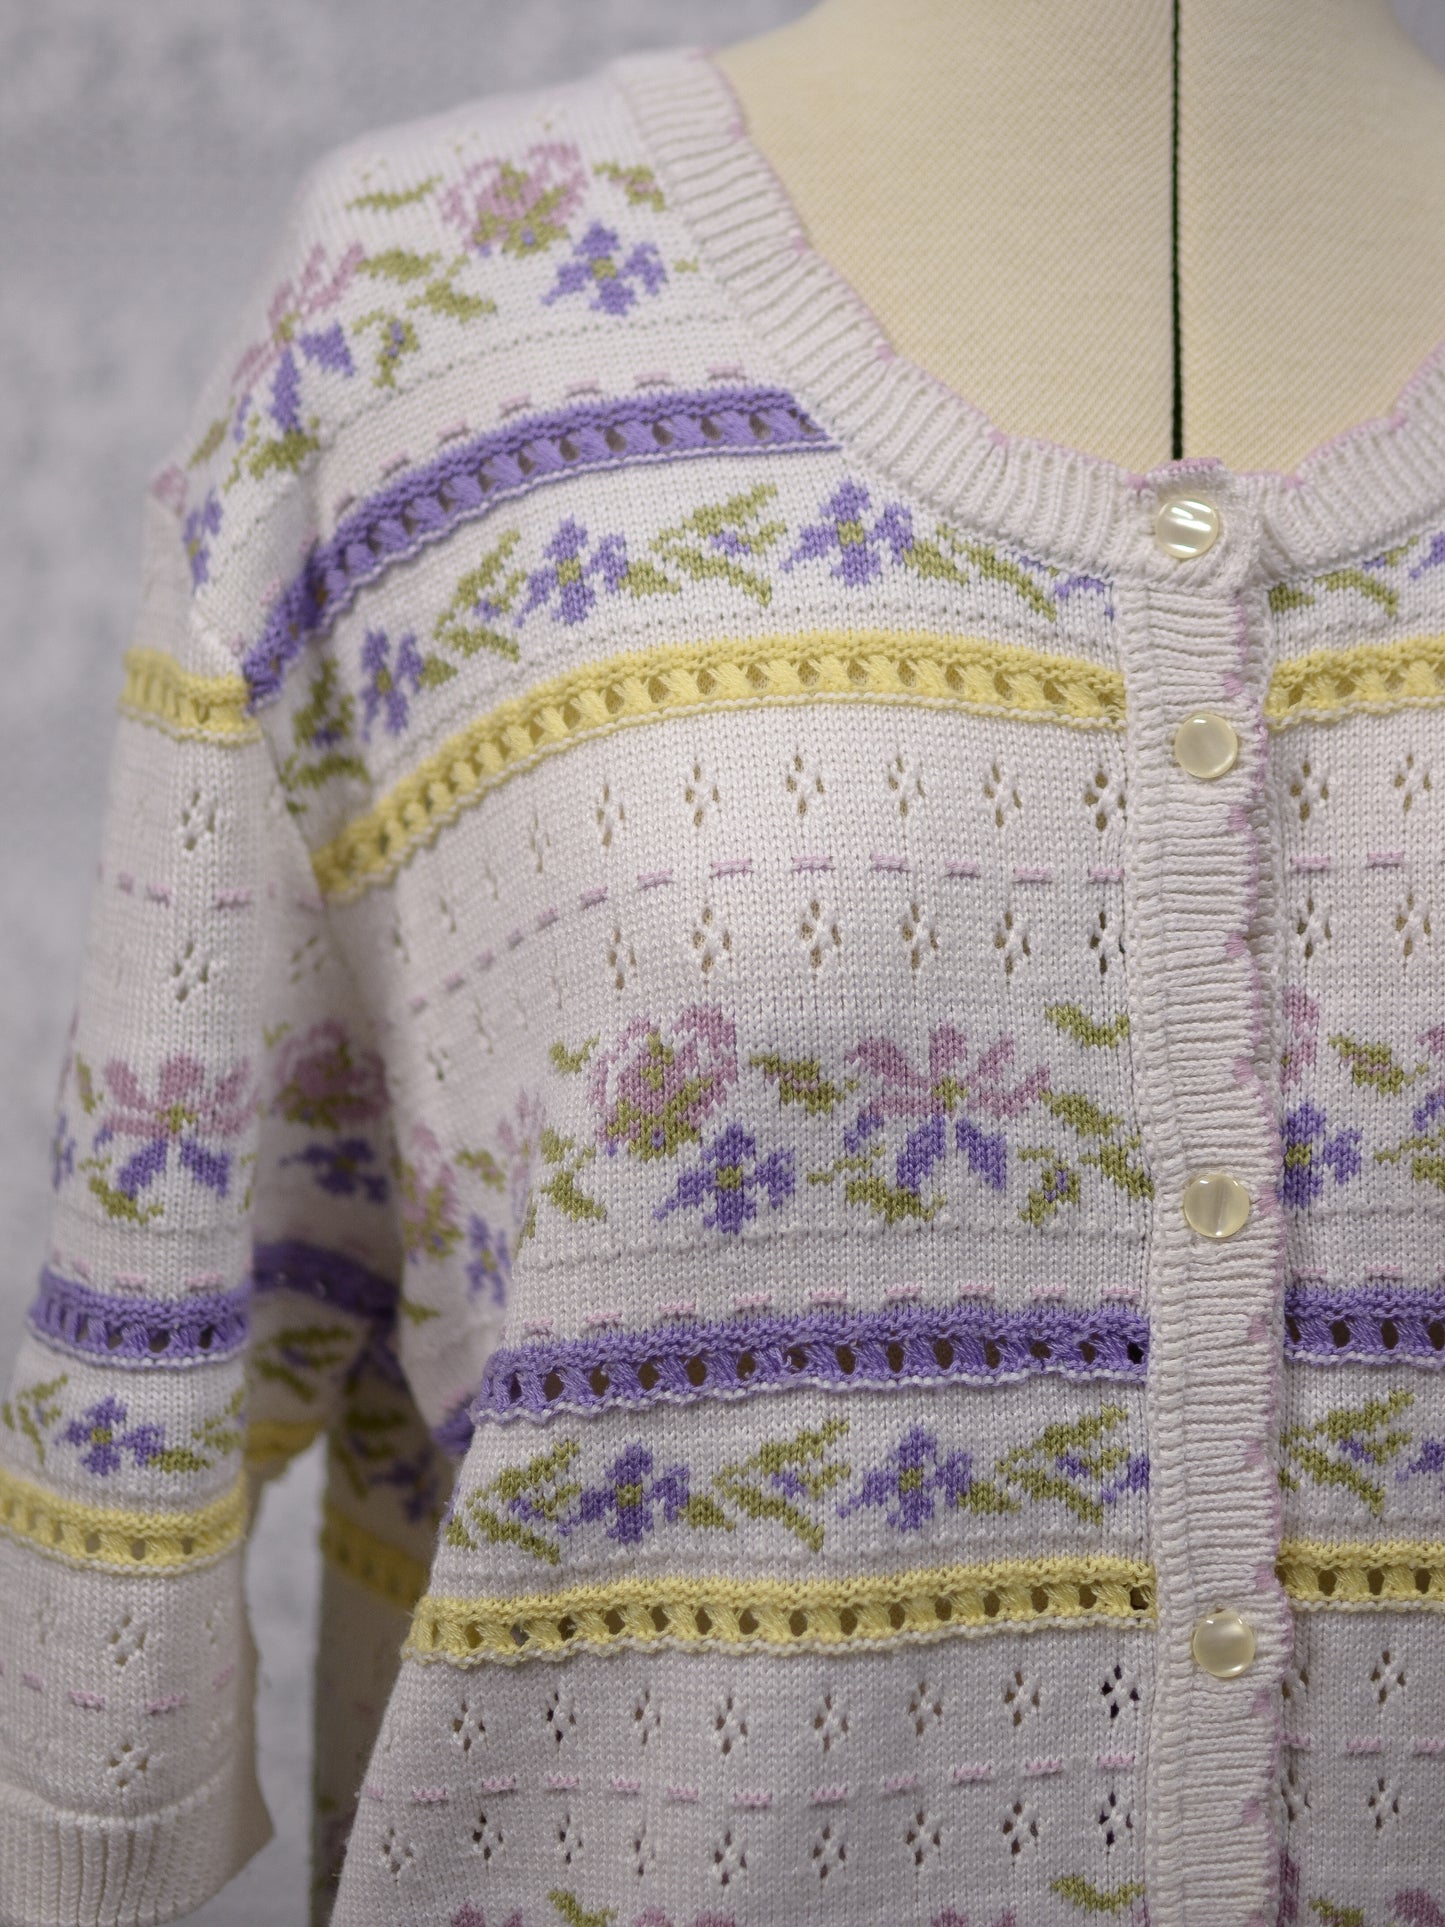 1990s St Michael cream, purple and yellow floral knitted short sleeve cardigan